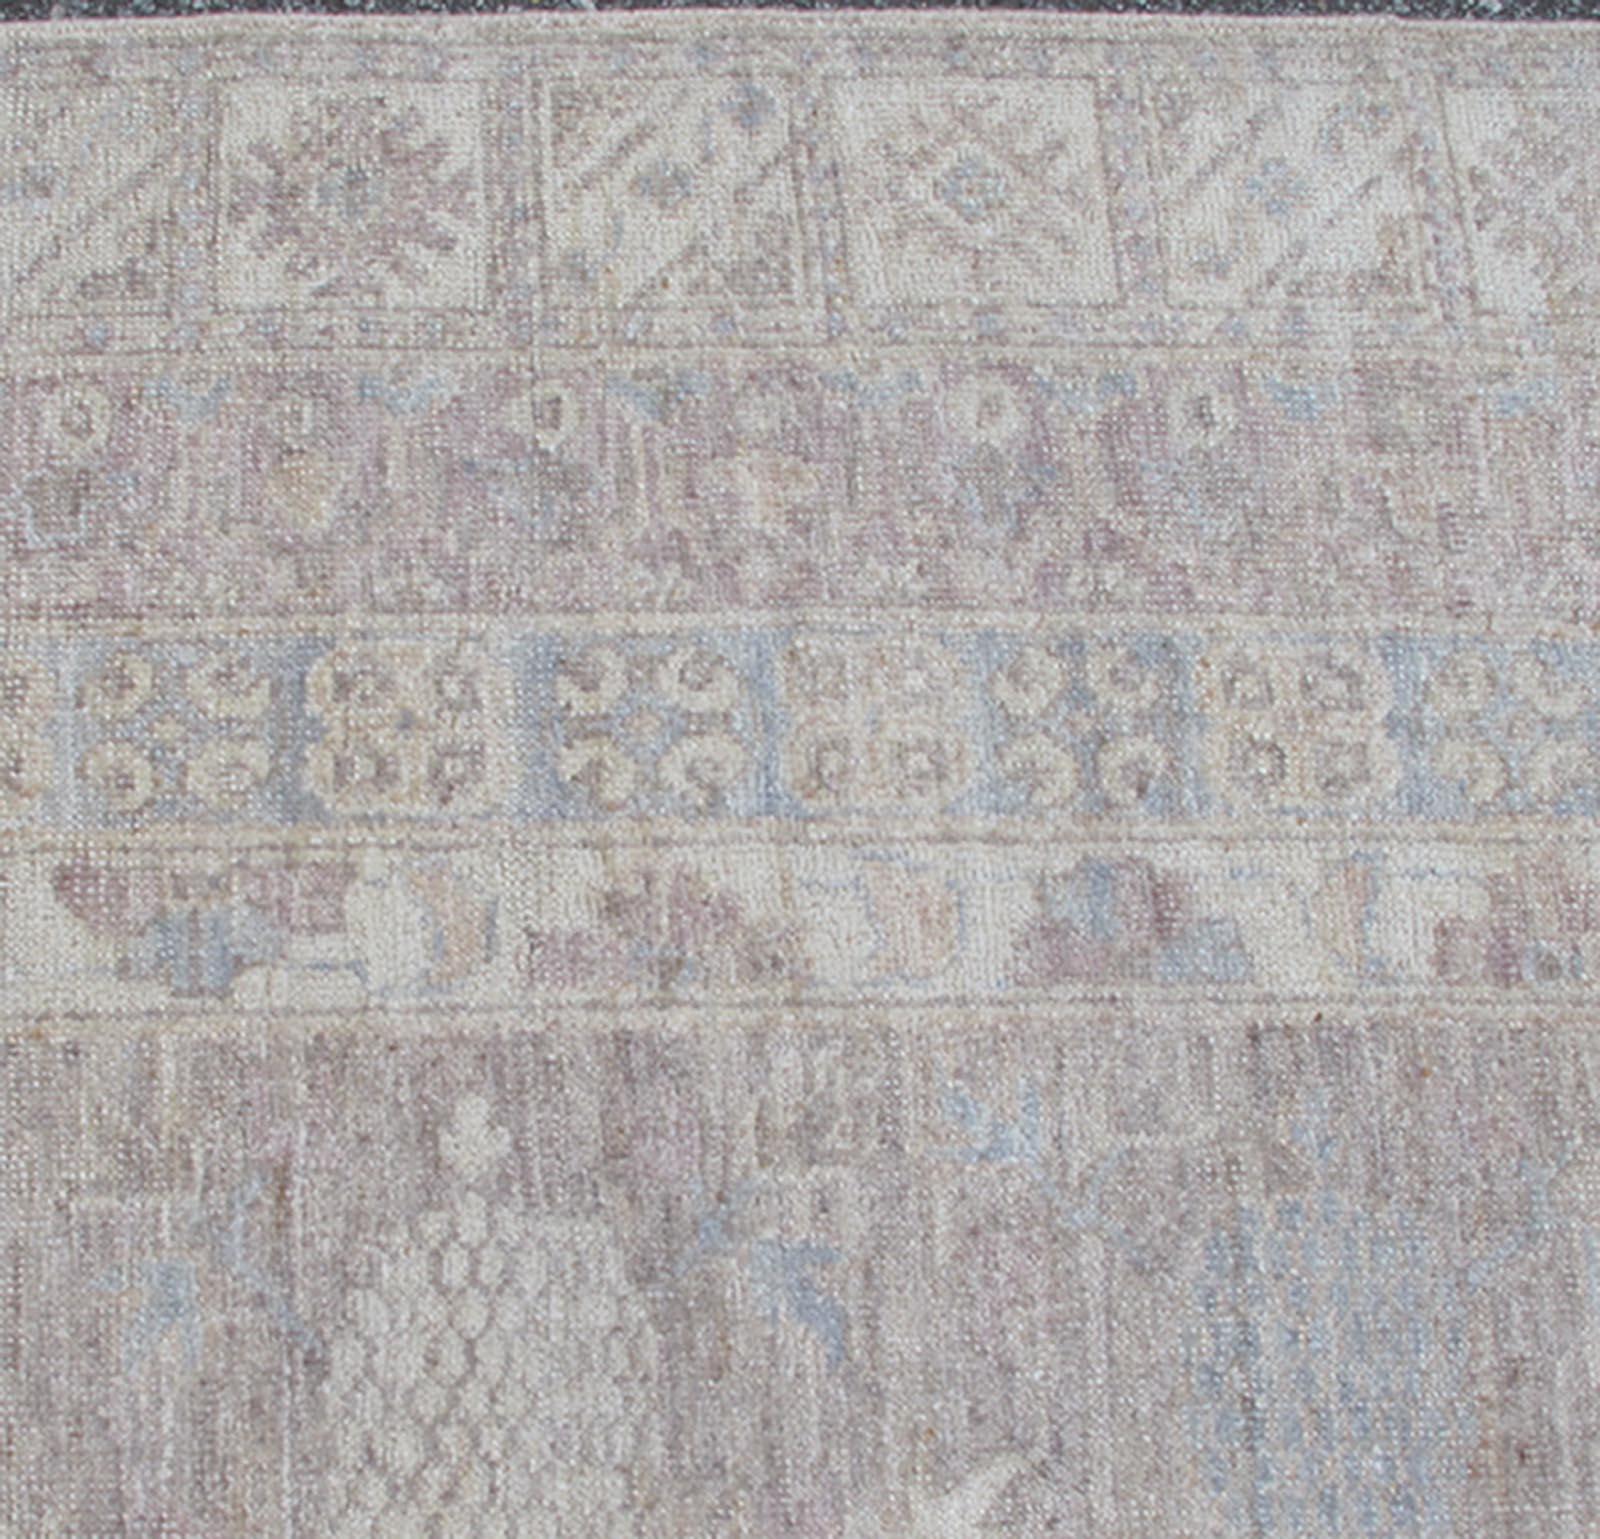 This Khotan features an all-over design flanked by a repeating pattern in the border with Asian Motifs. The entirety of the piece is rendered in light tones, which makes it a versatile rug, well-suited for a variety of interiors. Colors include